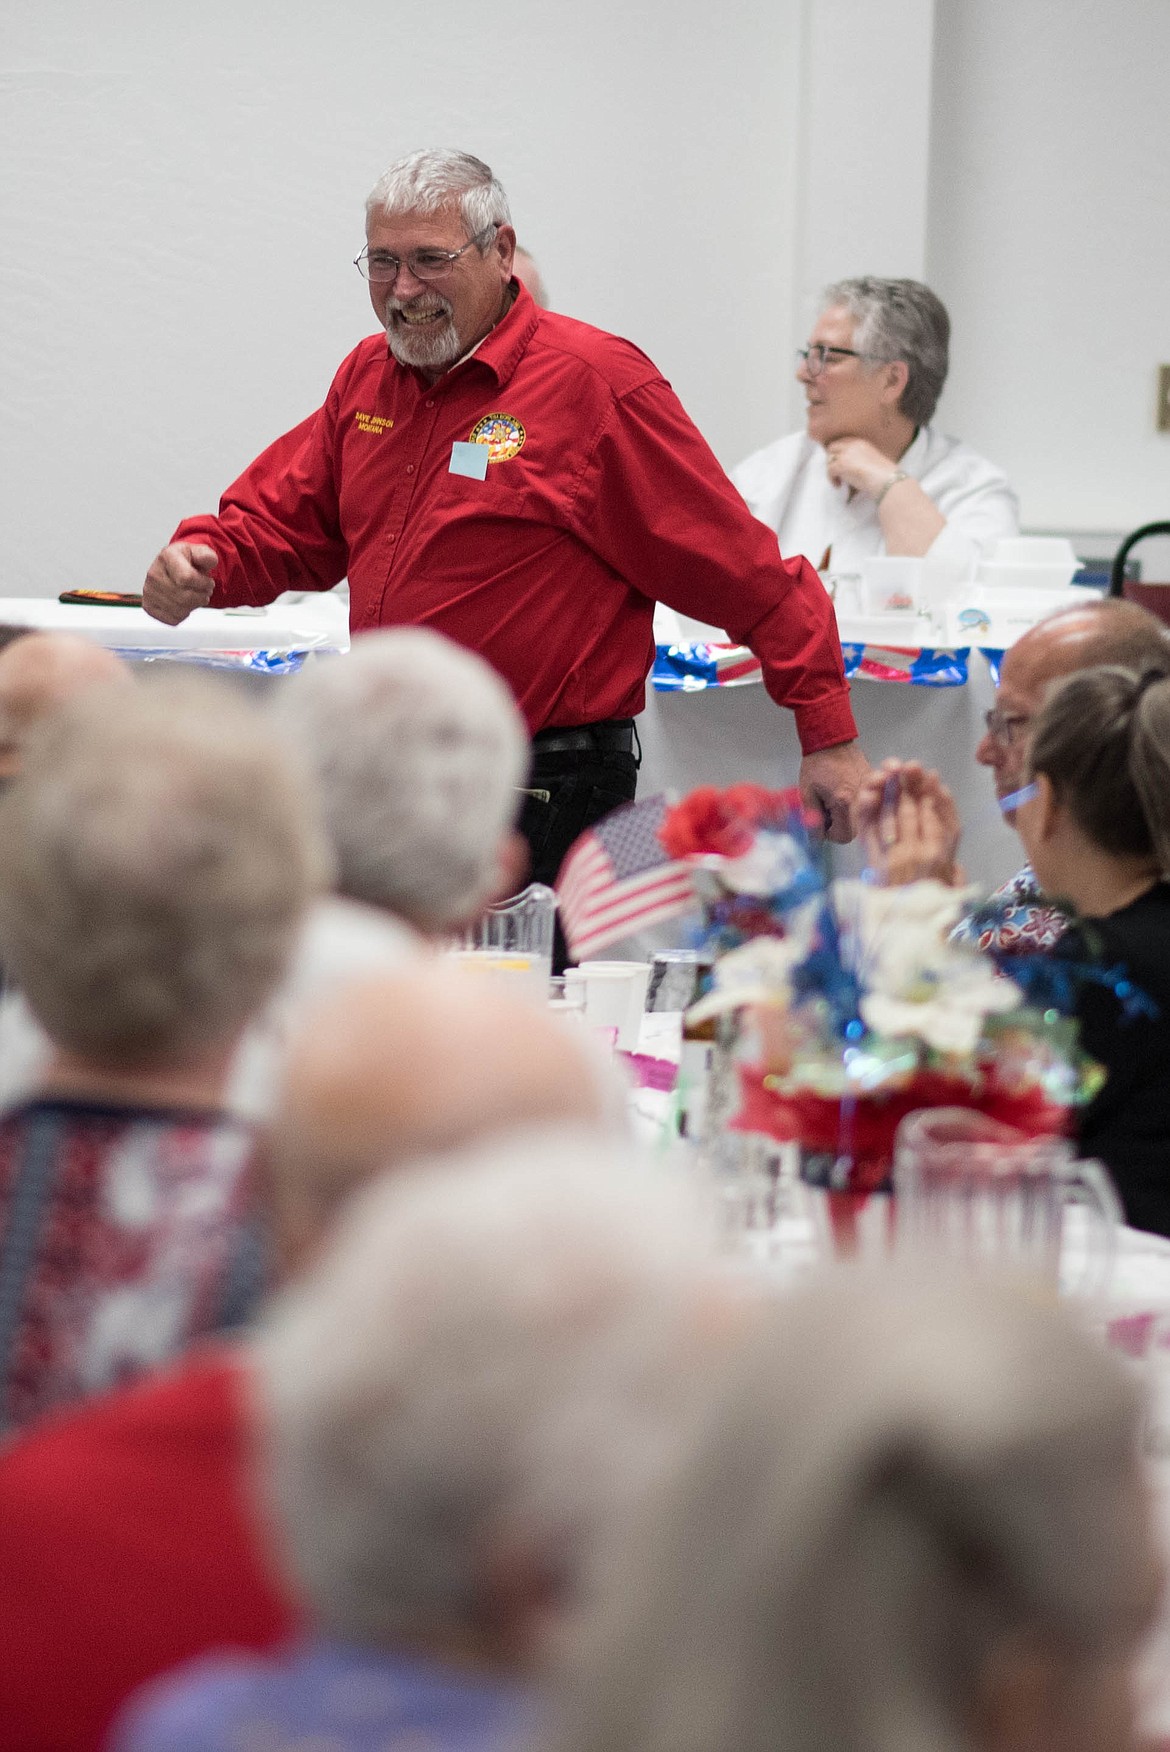 Dave Johnson prepares to receive an award during a VFW convention Friday in Libby. (Luke Hollister/The Western News)